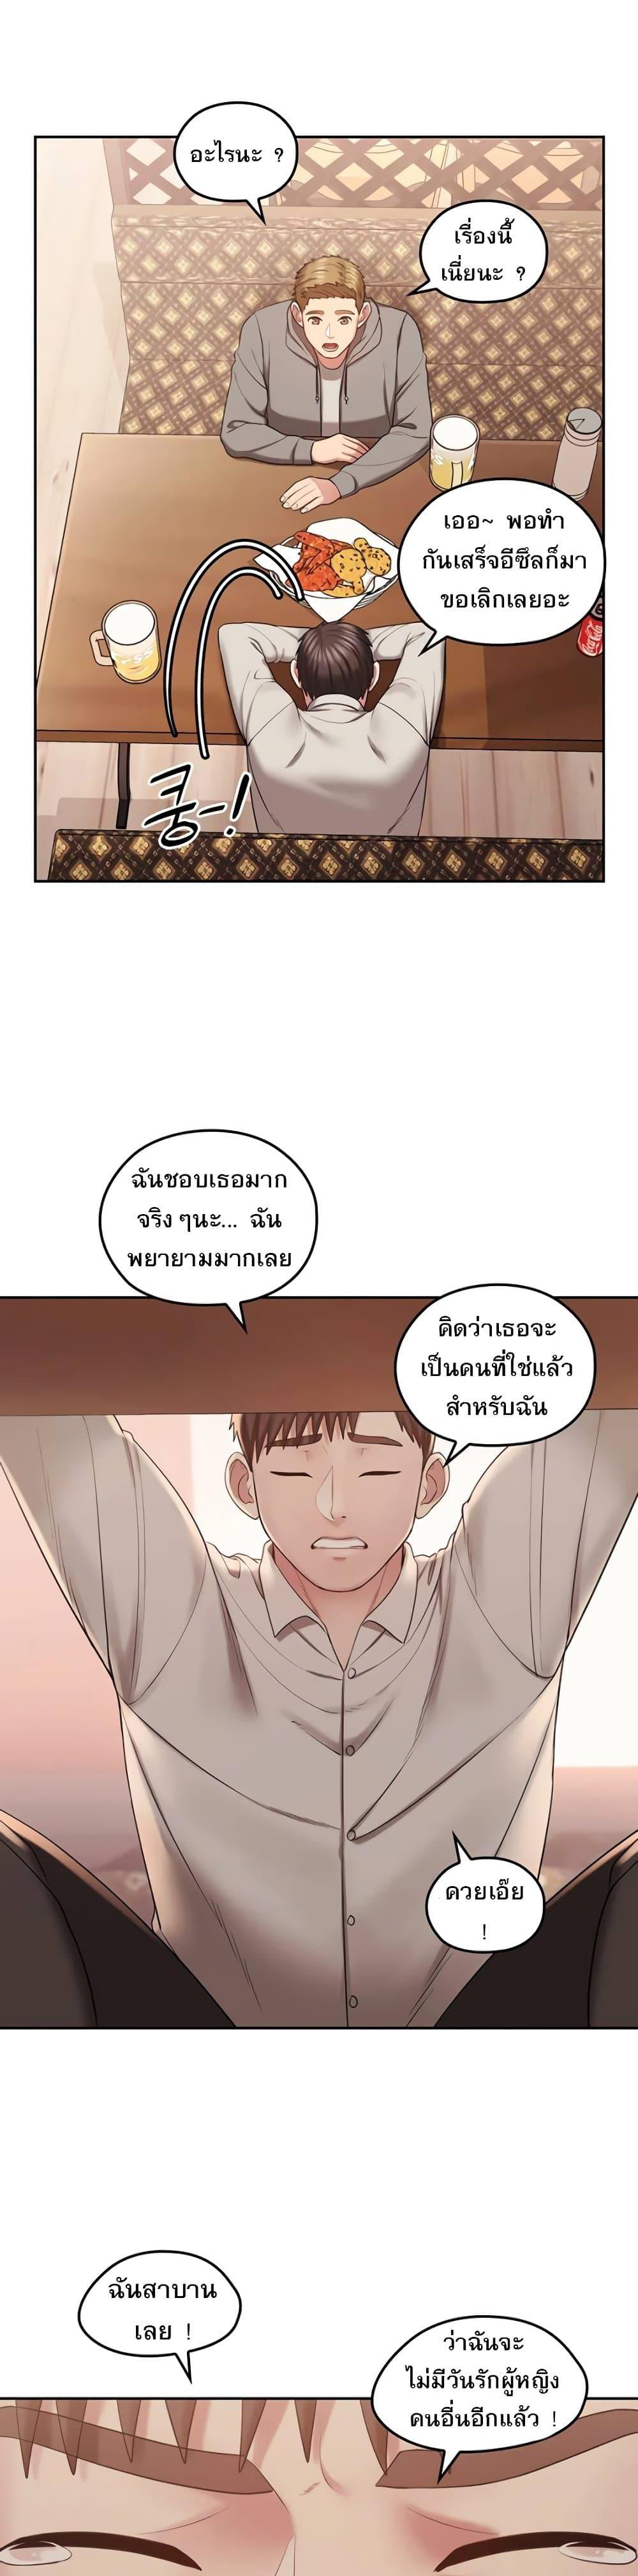 Sexual Consulting 2 ภาพ 13